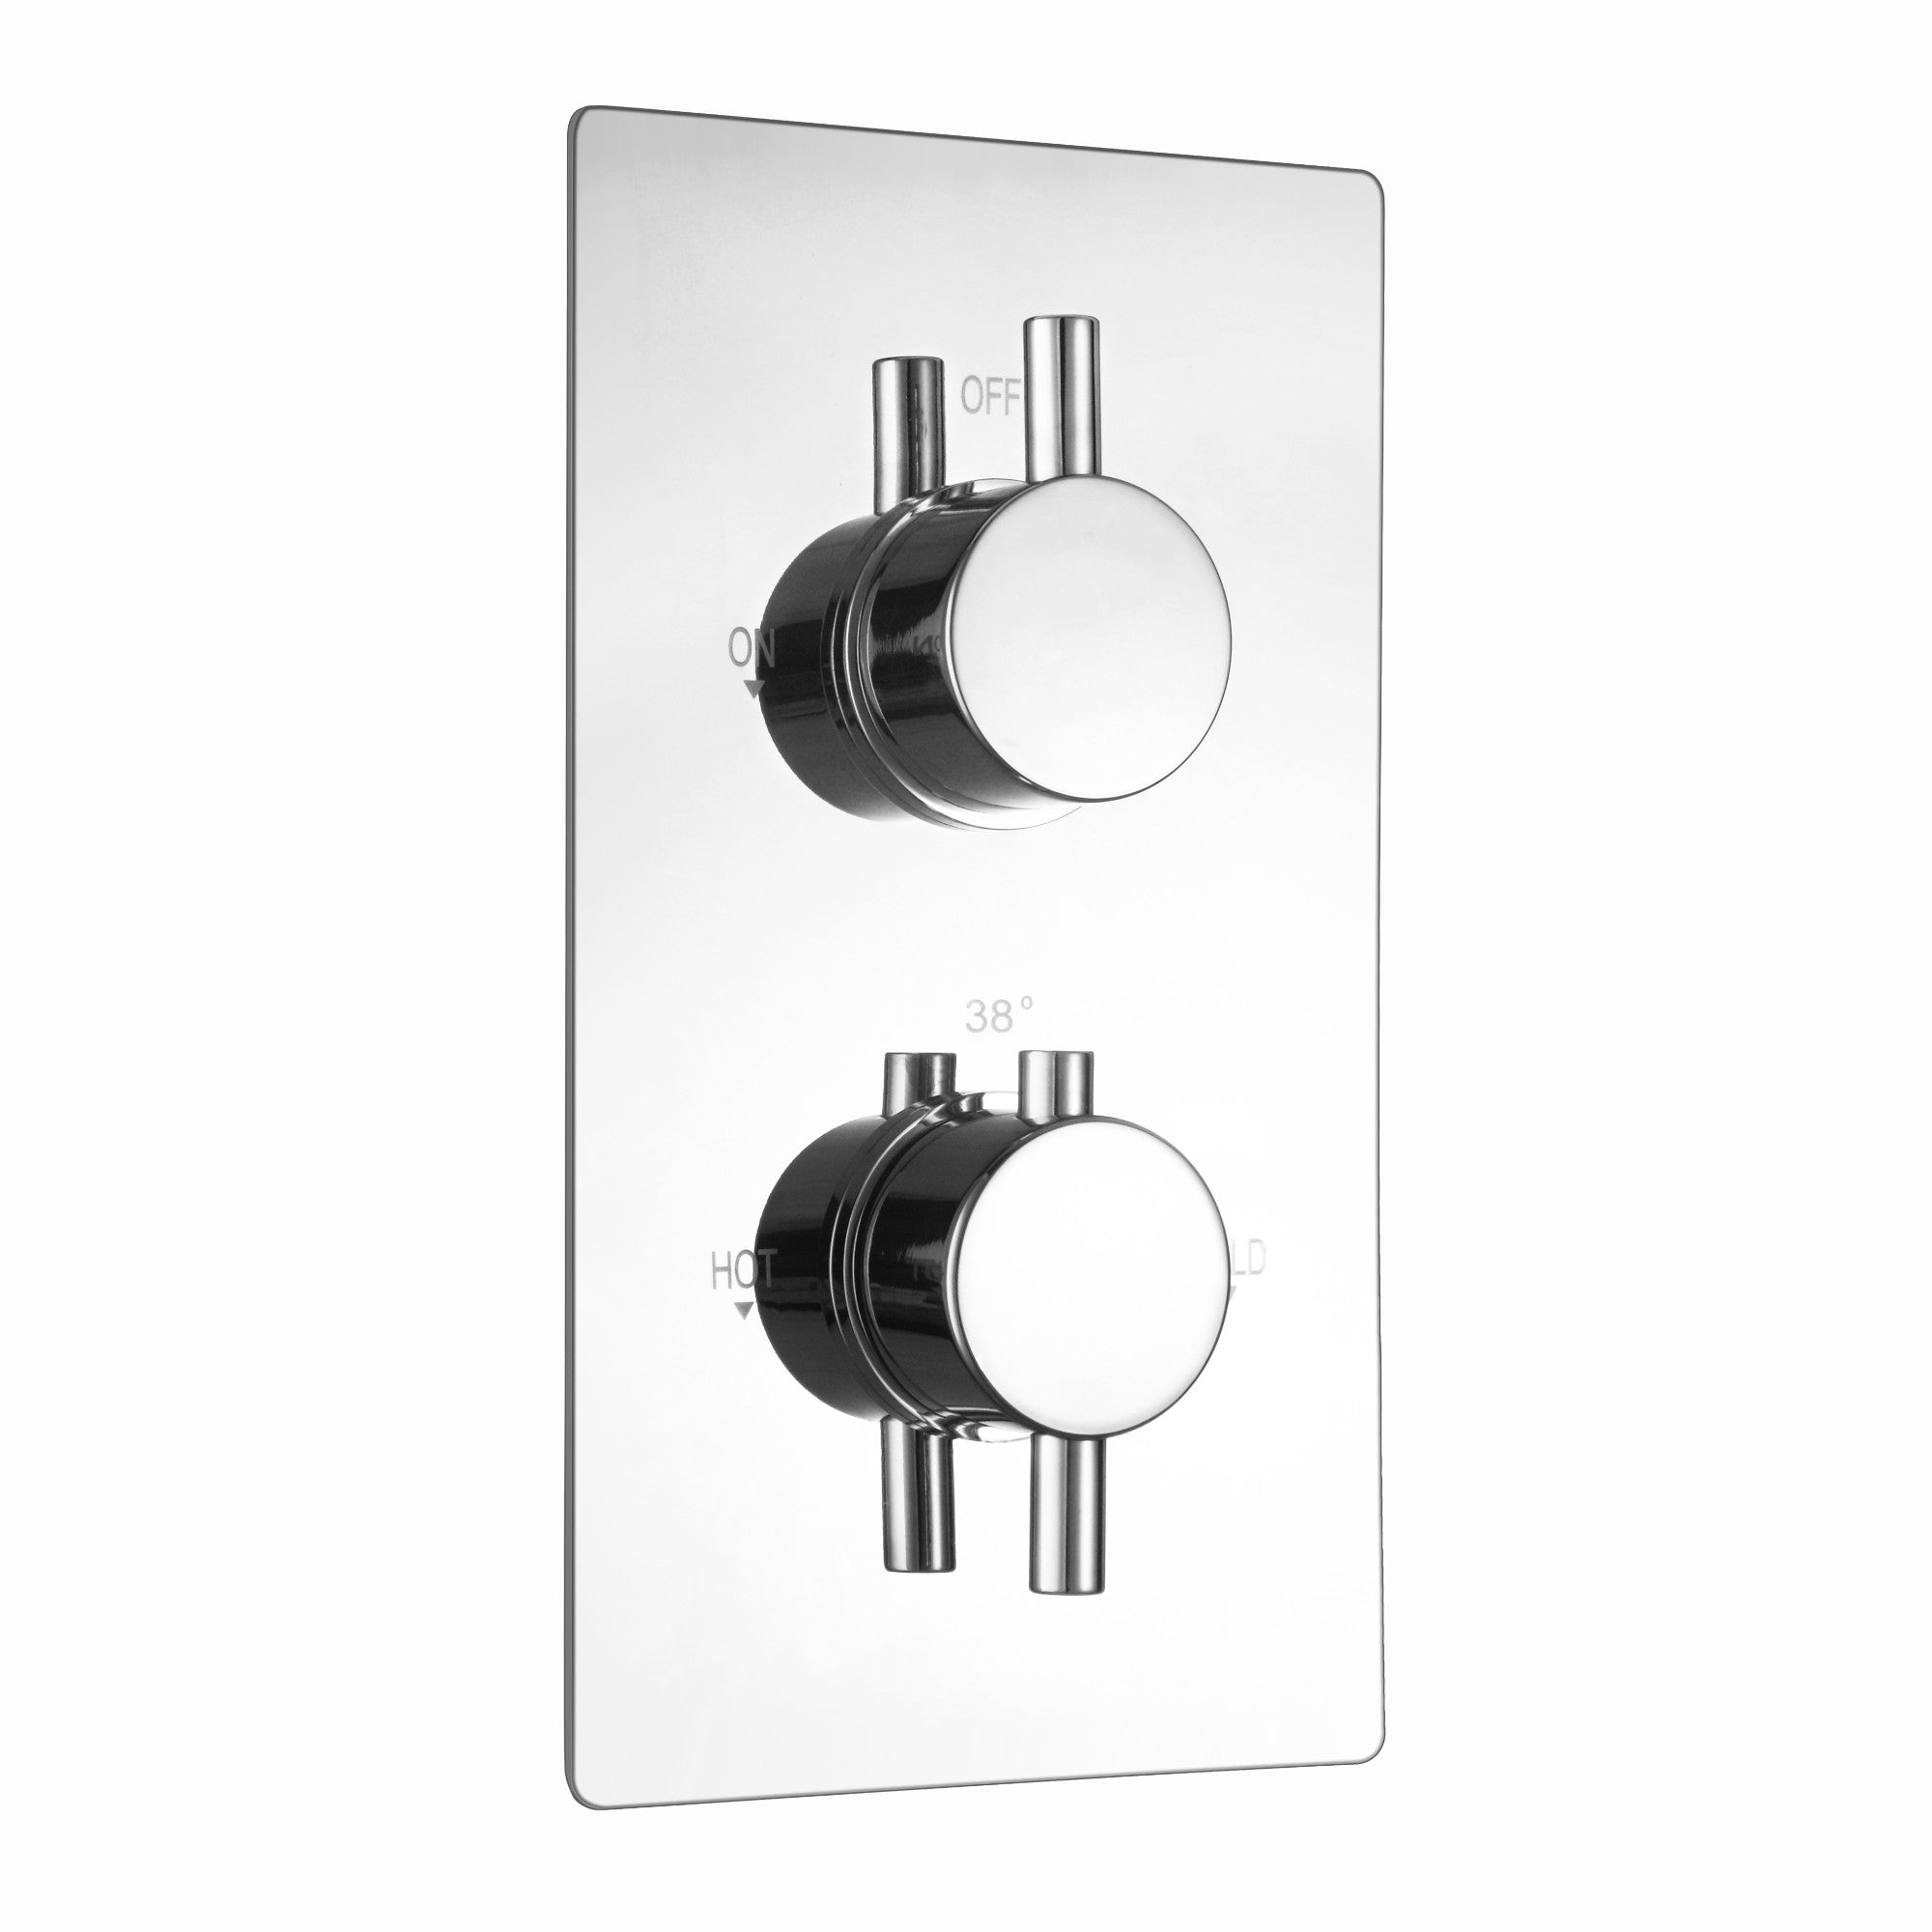 Venice contemporary round concealed thermostatic twin shower valve with 1 outlet - chrome - Showers